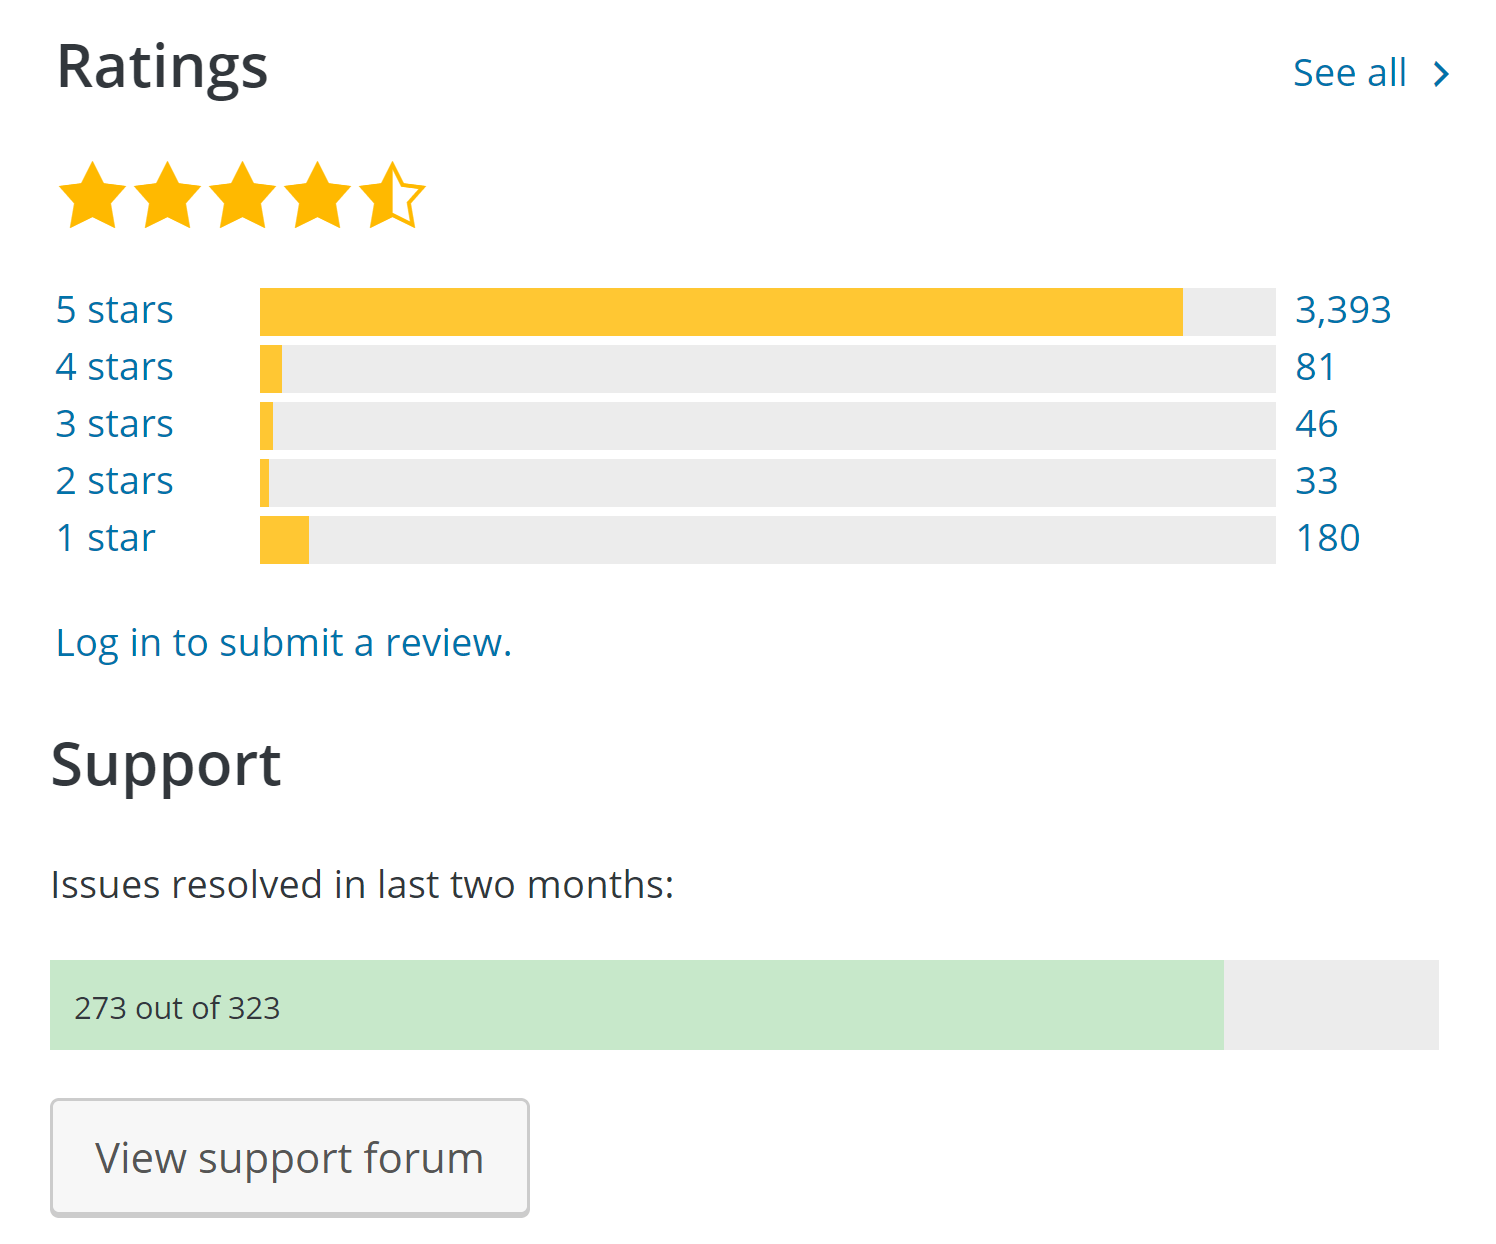 An example of a plugin with high ratings and many resolved support issues.